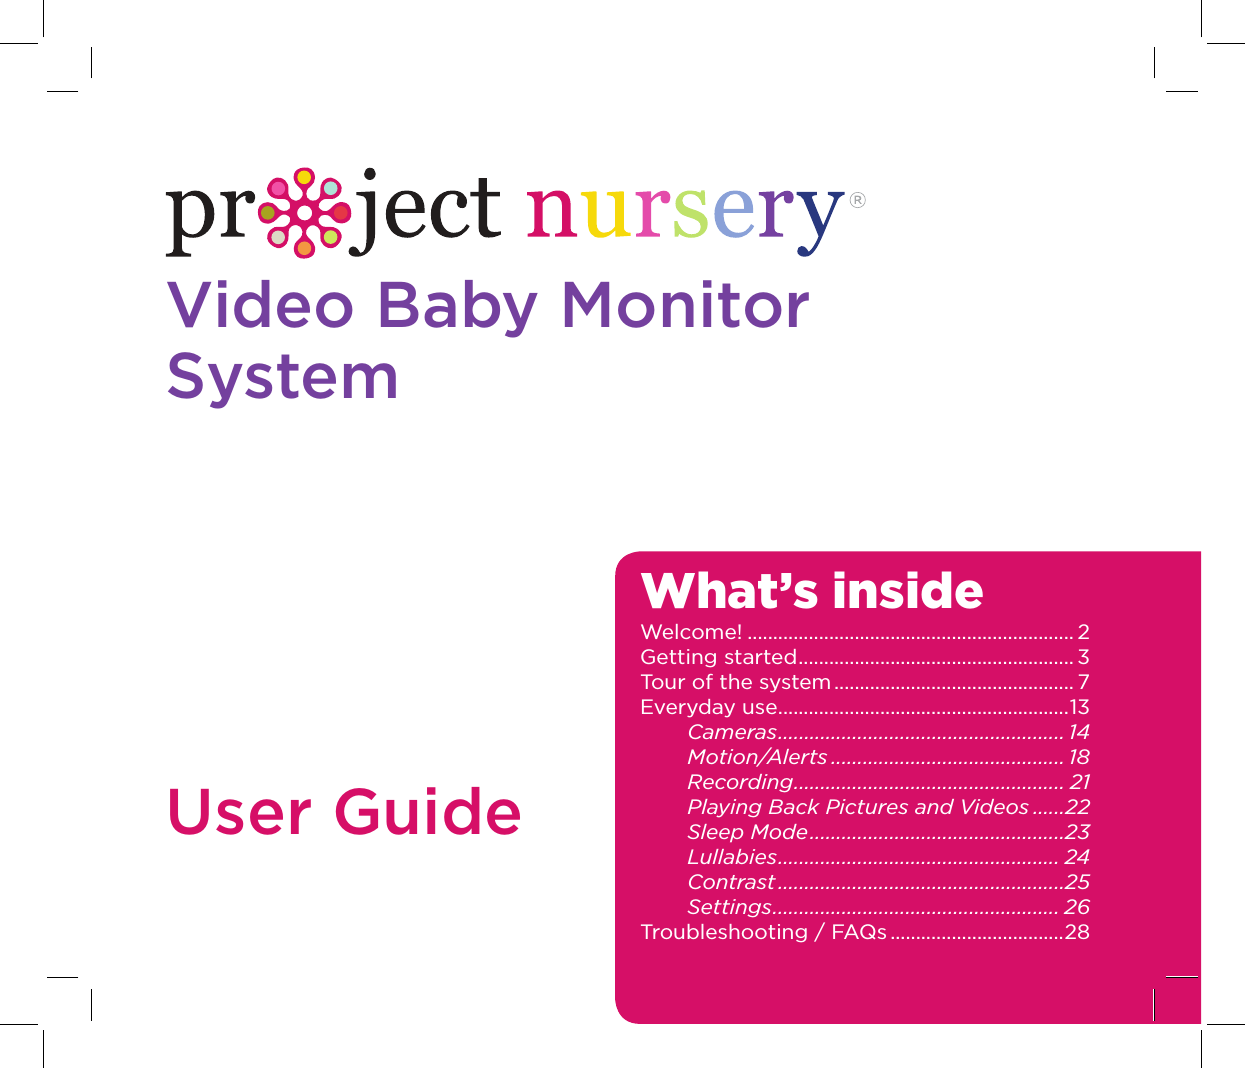 Video Baby Monitor SystemUser GuideWhat’s insideWelcome! ................................................................ 2Getting started ...................................................... 3Tour of the system ............................................... 7Everyday use .........................................................13Cameras ...................................................... 14Motion/Alerts ............................................ 18Recording ................................................... 21Playing Back Pictures and Videos ......22Sleep Mode ................................................23Lullabies ..................................................... 24Contrast ......................................................25Settings ...................................................... 26Troubleshooting / FAQs ..................................28